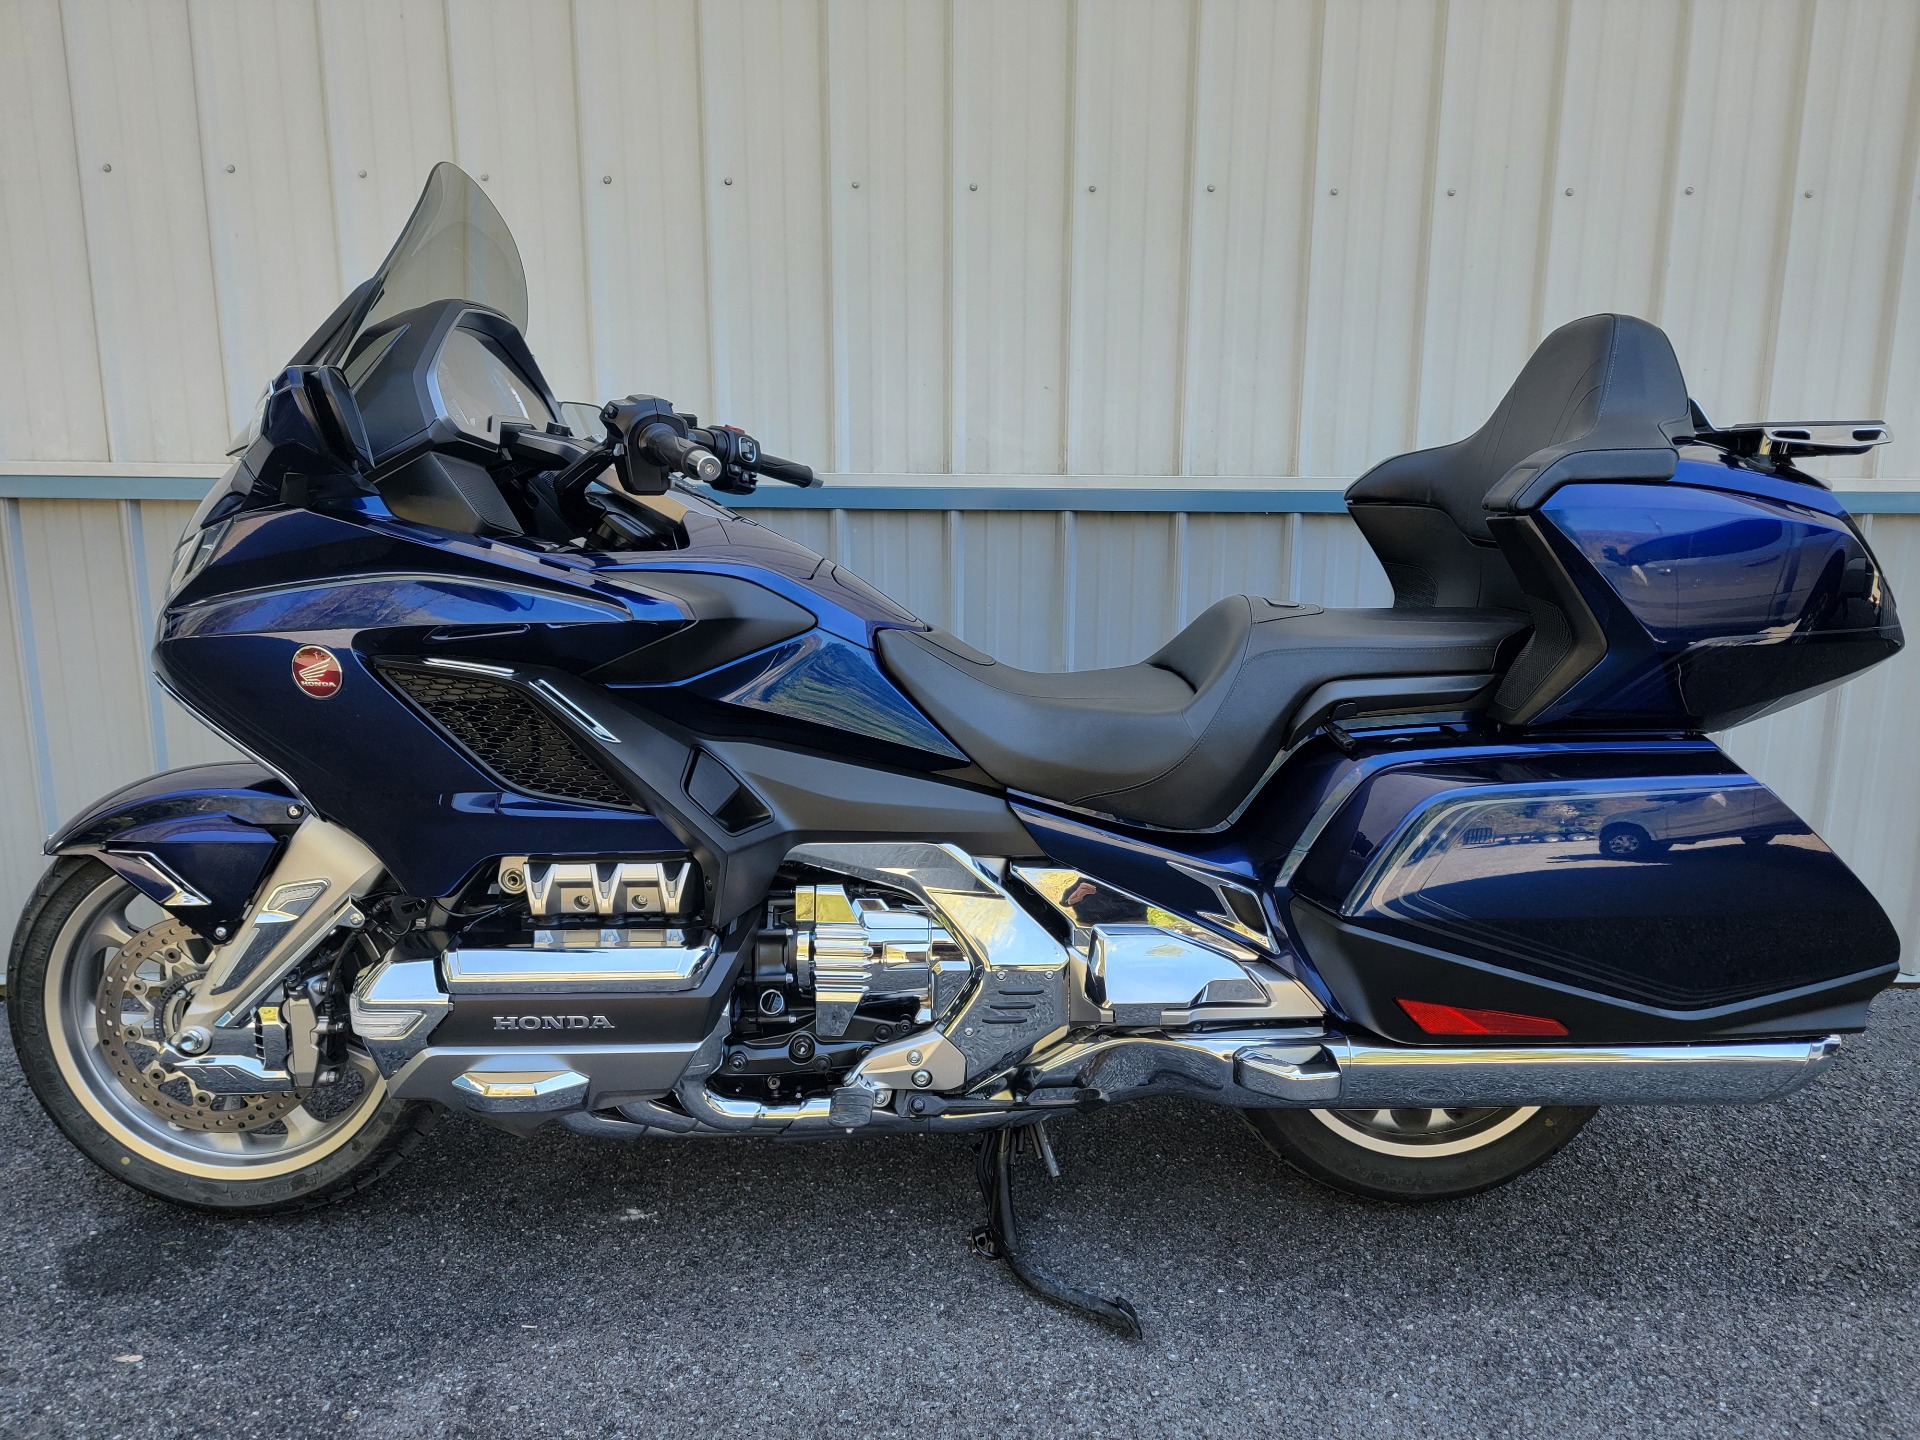 2018 Honda Gold Wing Tour Automatic DCT in Spring Mills, Pennsylvania - Photo 5